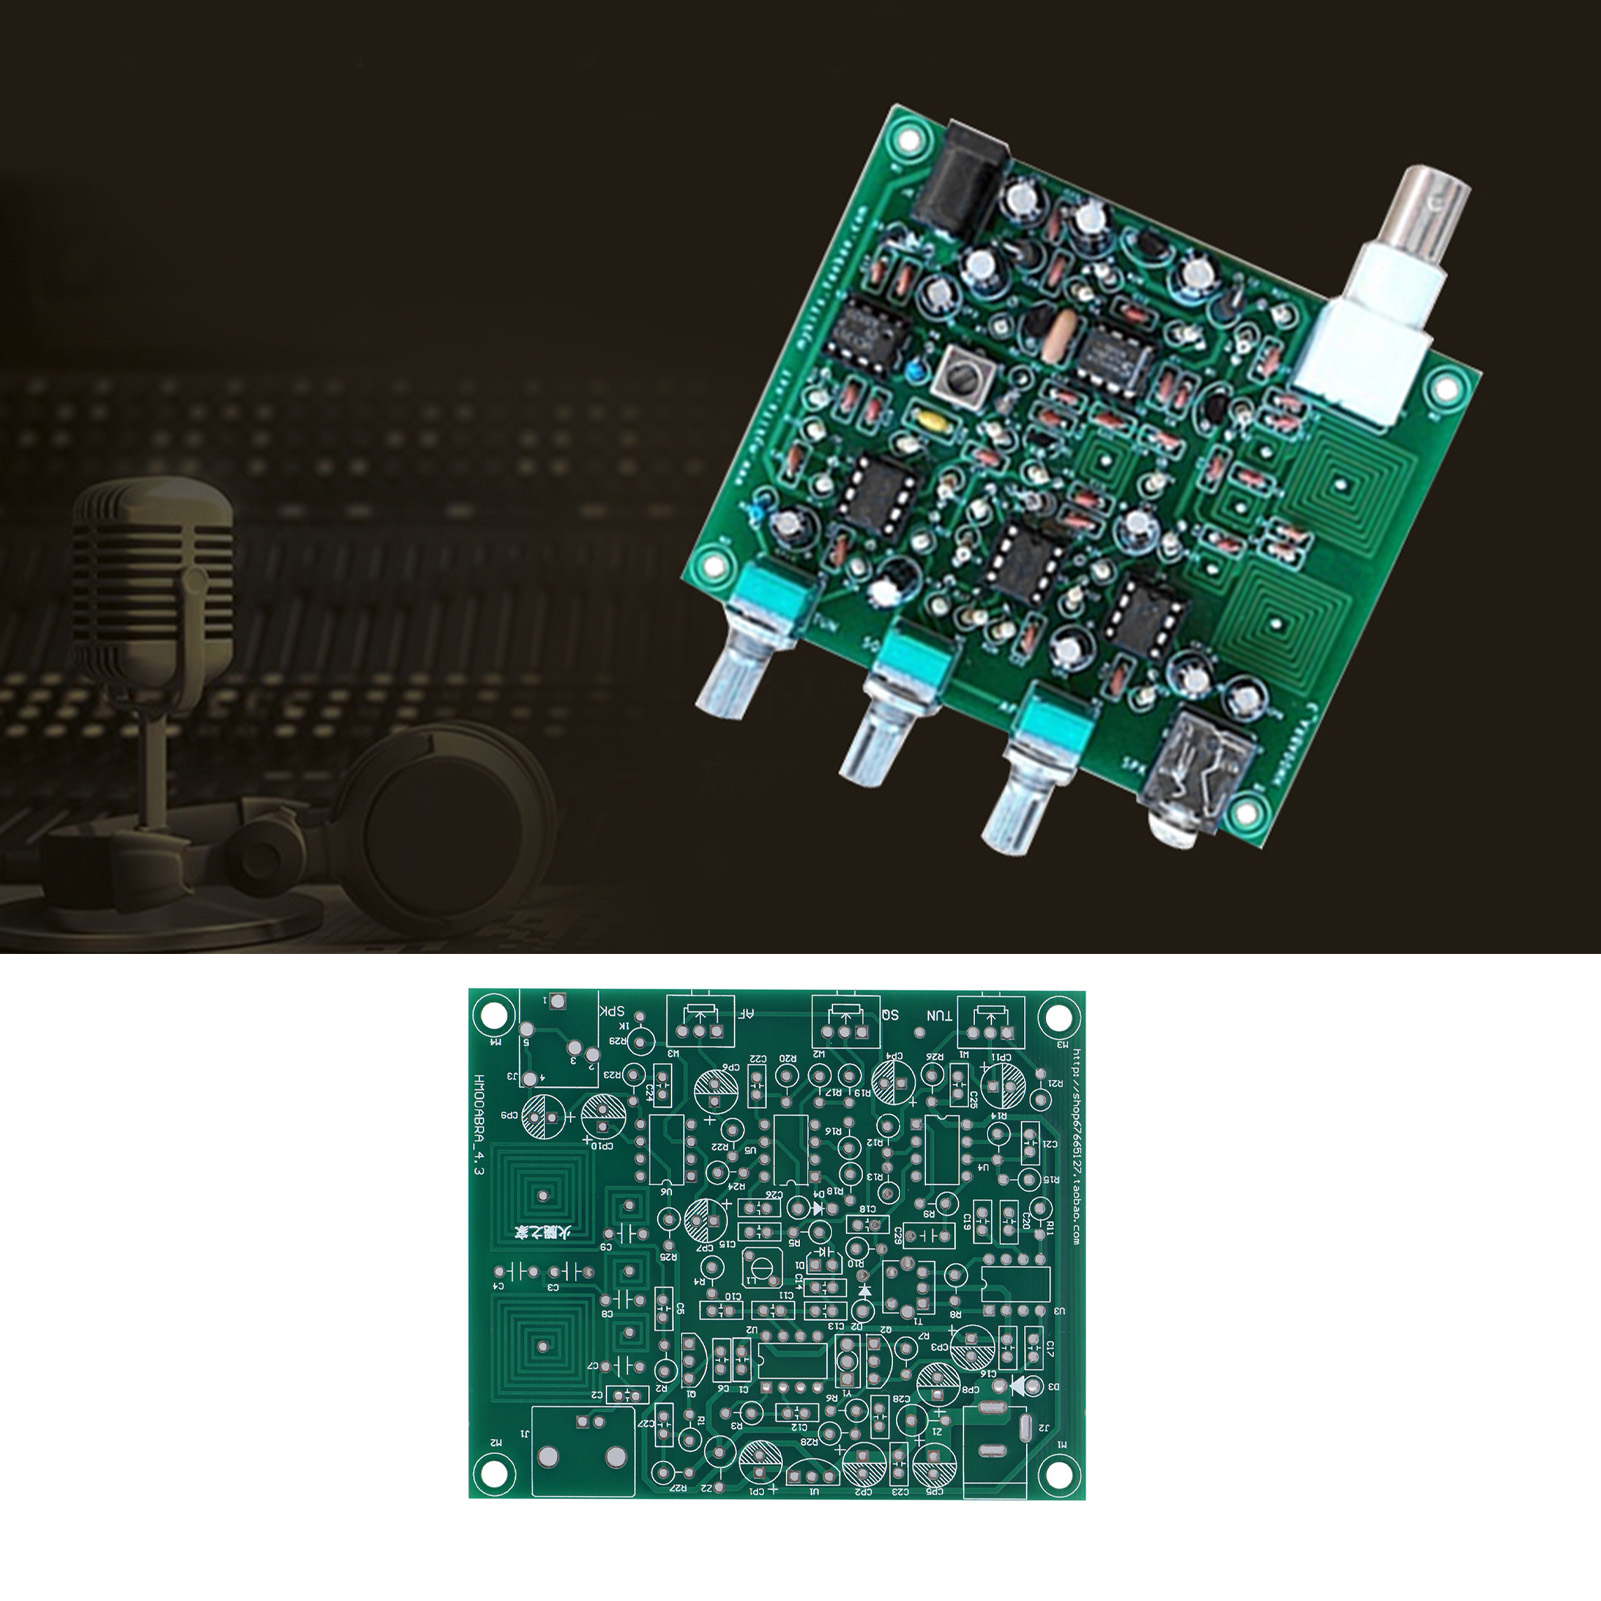 Airband Receiver, Reliable Aviation Receiver, Multifunction Practical DIY  For Airband Reciever